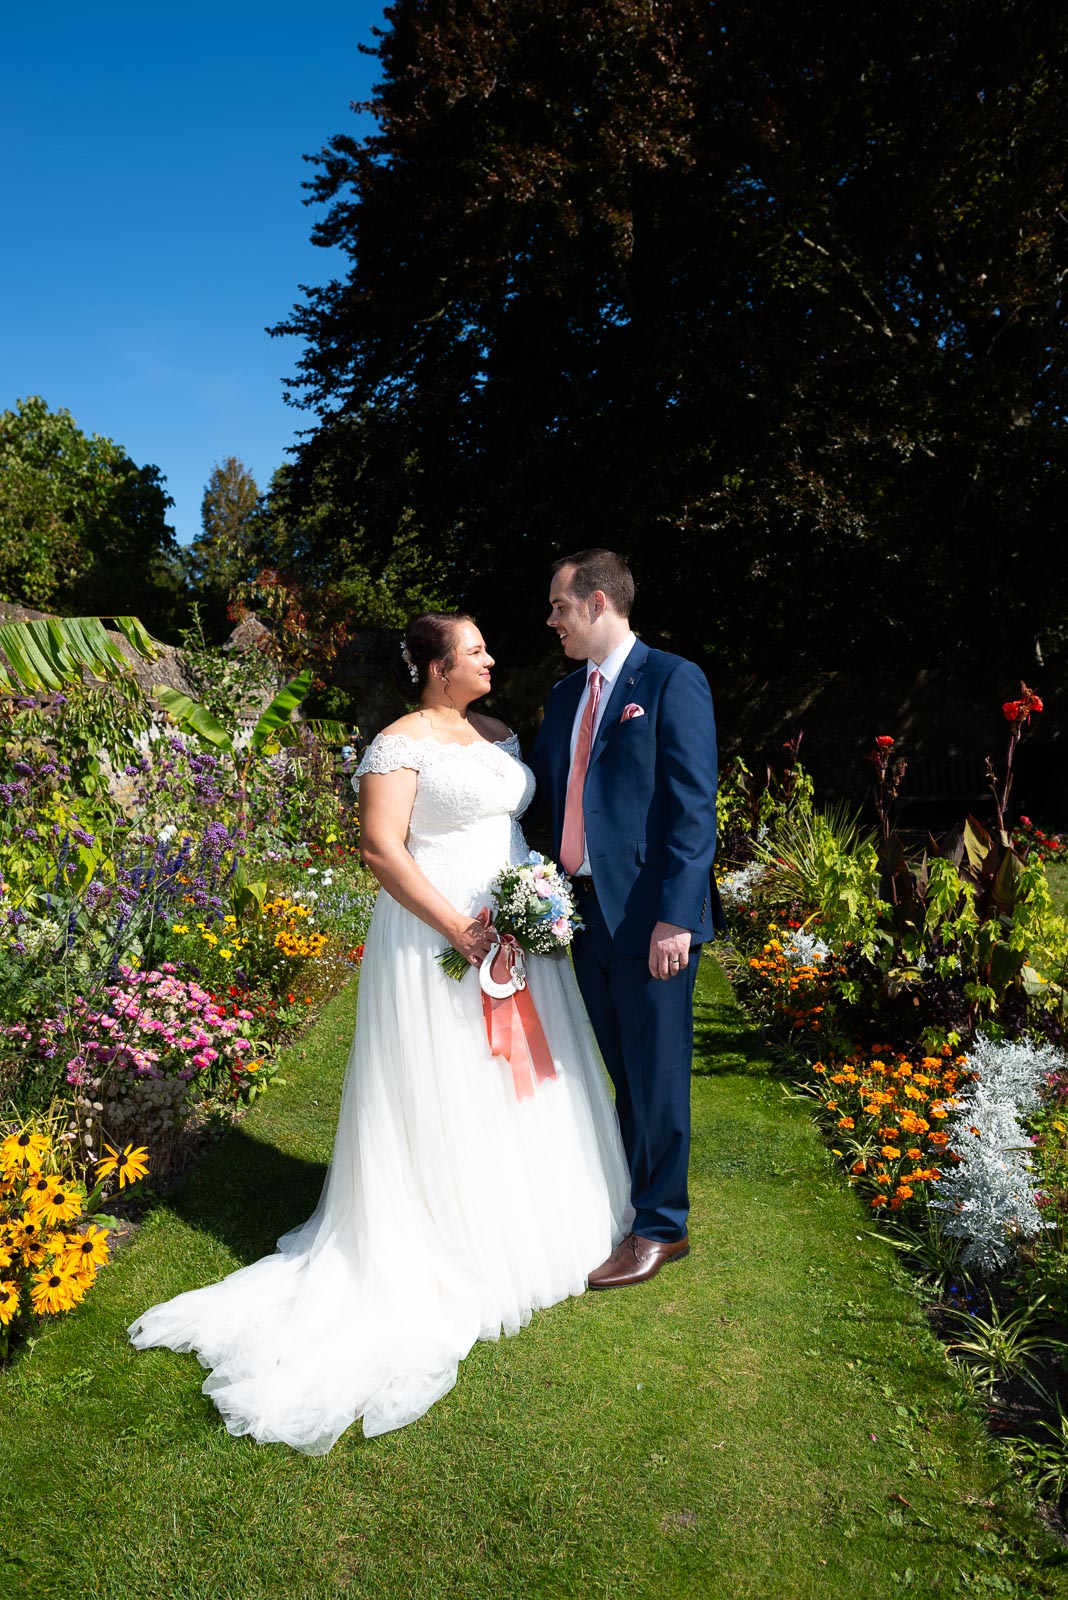 Amy and James look at eachother inbetween the blooming beds of Southover Grange after their wedding.